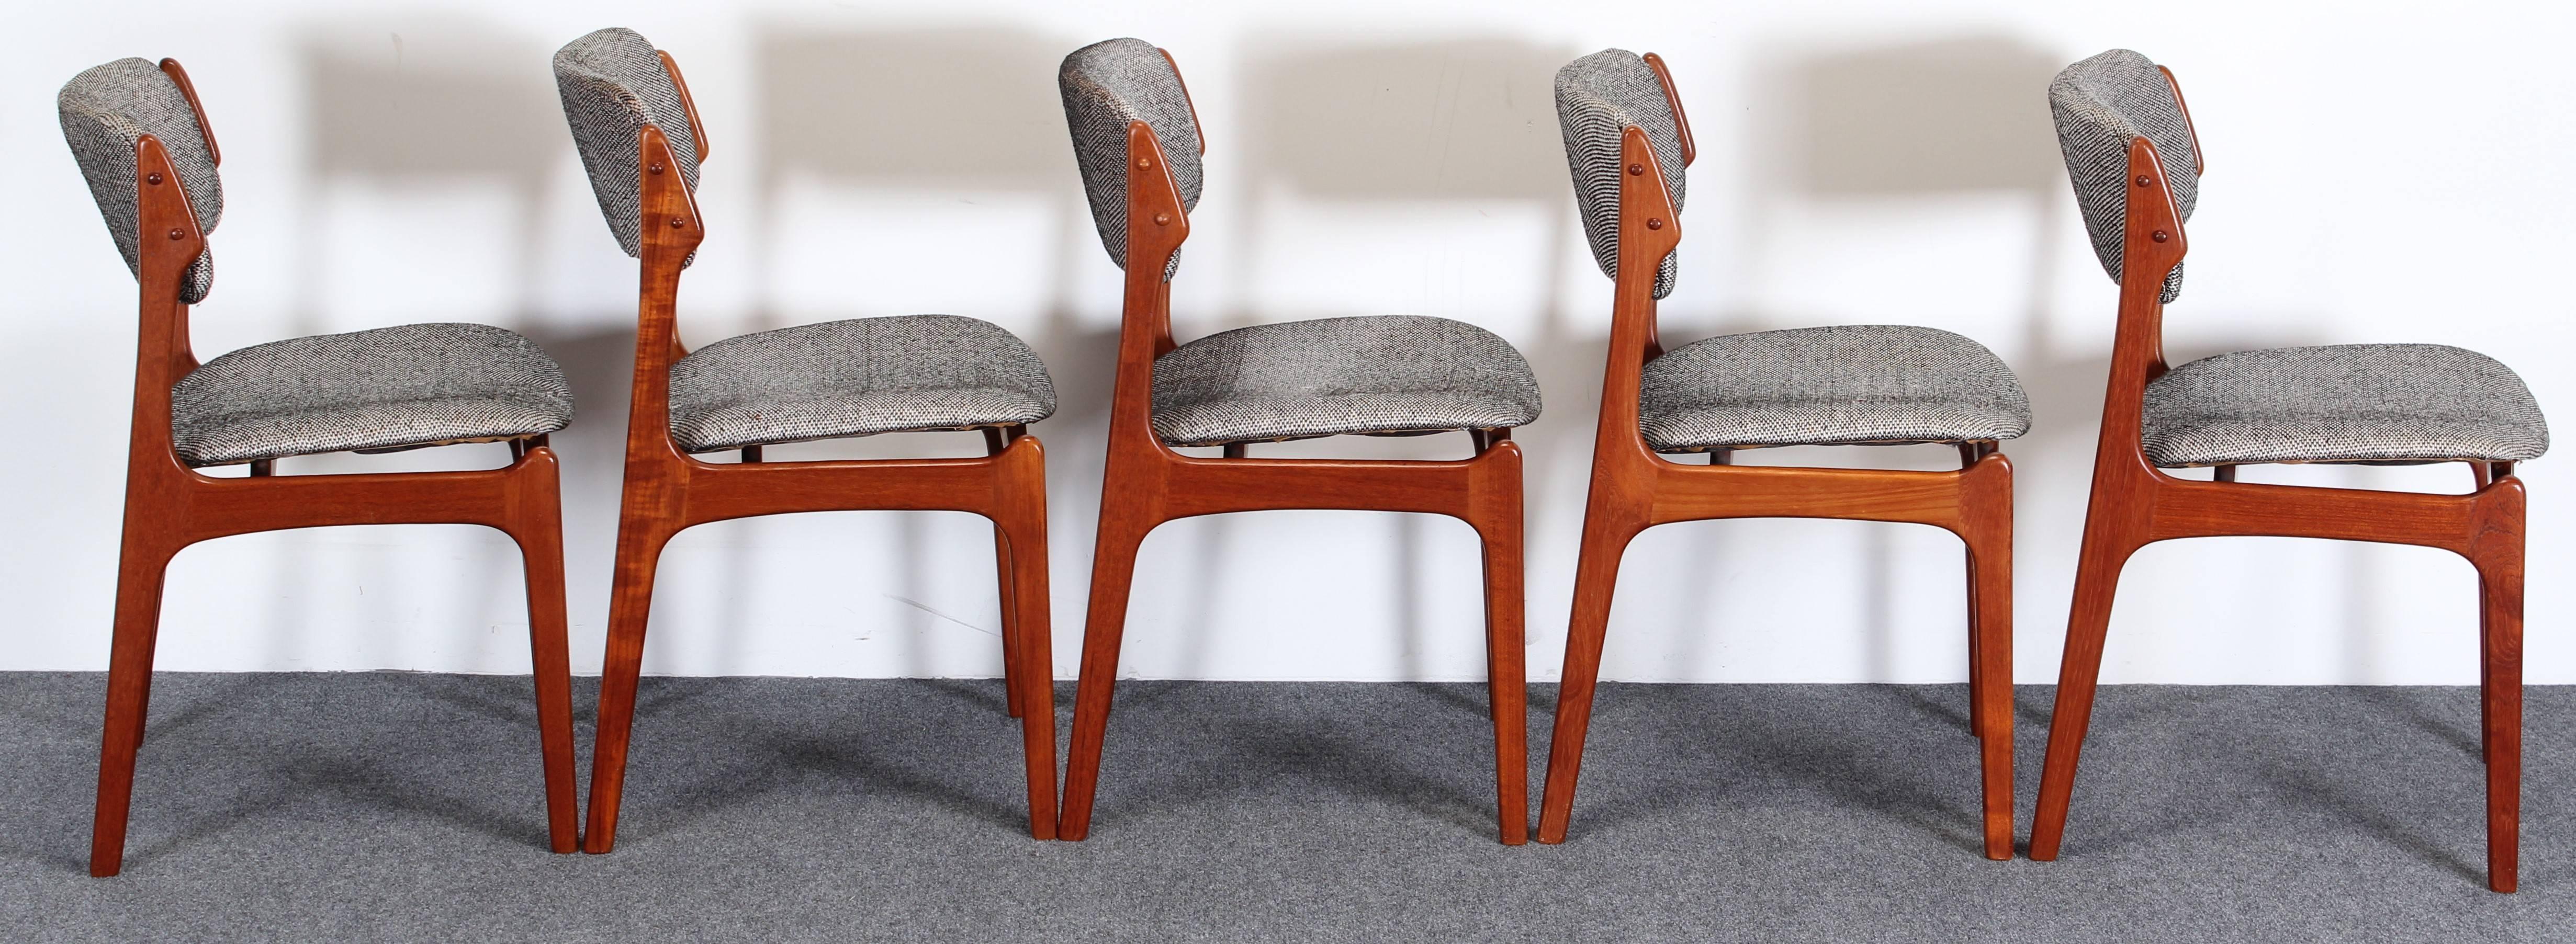 A sculptural set of five dining chairs by Model 49 by Erik Buch for Oddense Maskinsnedkeri. New upholstery needed. Wood has very nice grain. A couple of back rests are loose which can be modified at time of new upholstery. Seat width is 18.5 inches